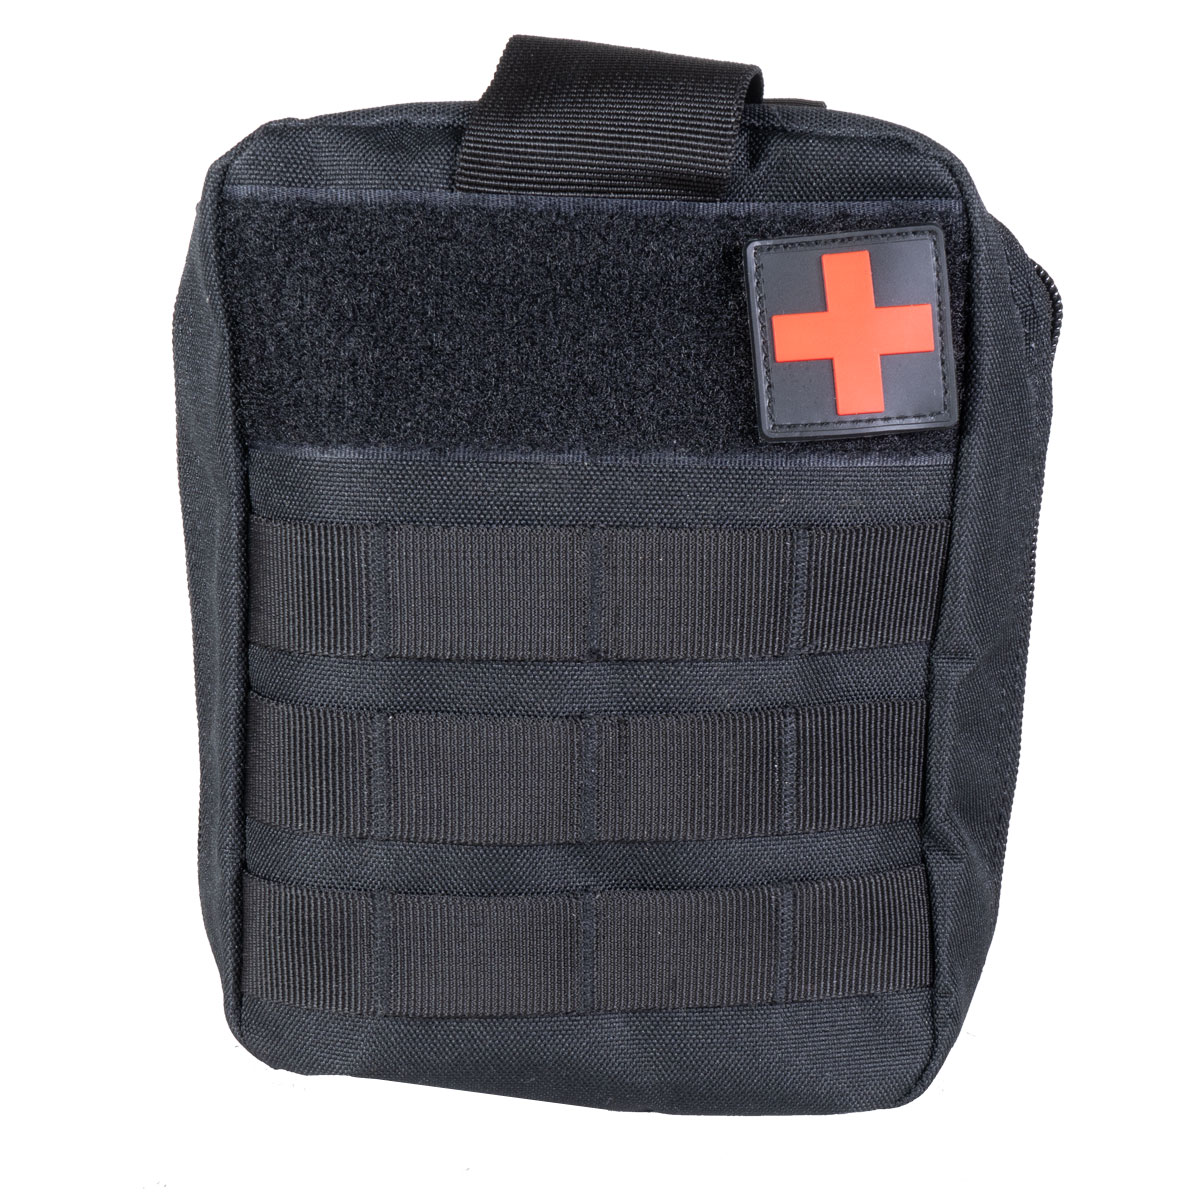 Outdoors Portable Medical First Aid Kit - Tear Away Tactical Design